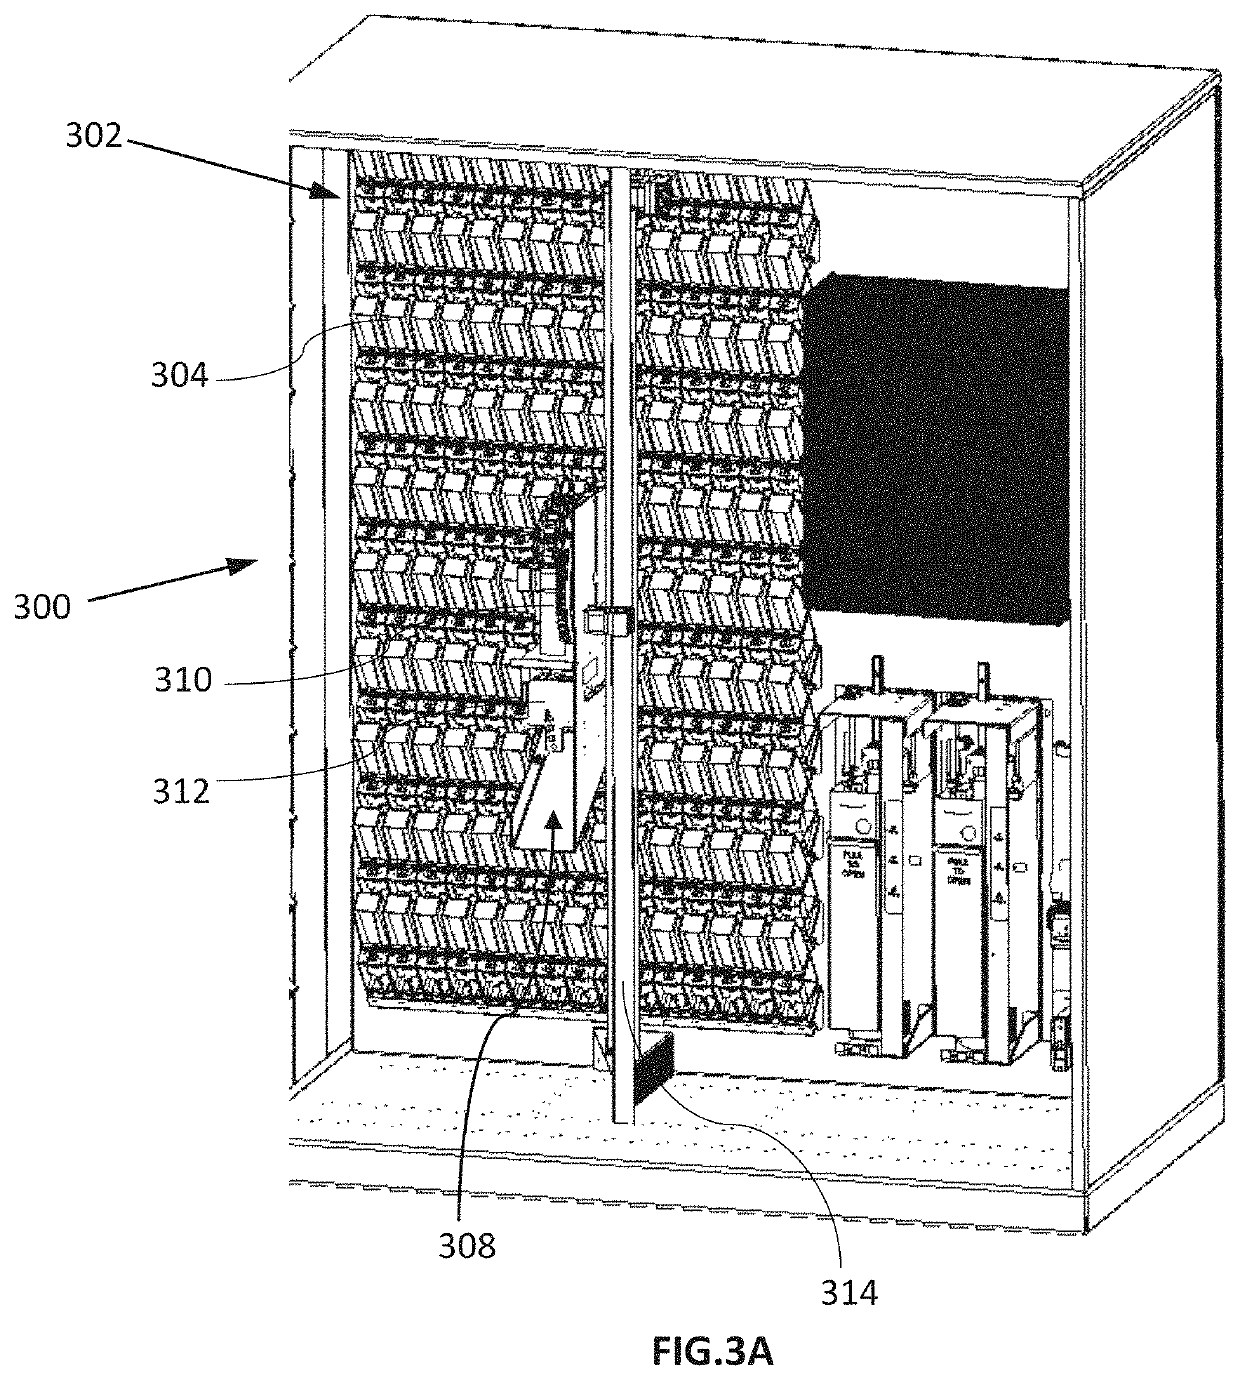 Medication containers in medication dispensing system